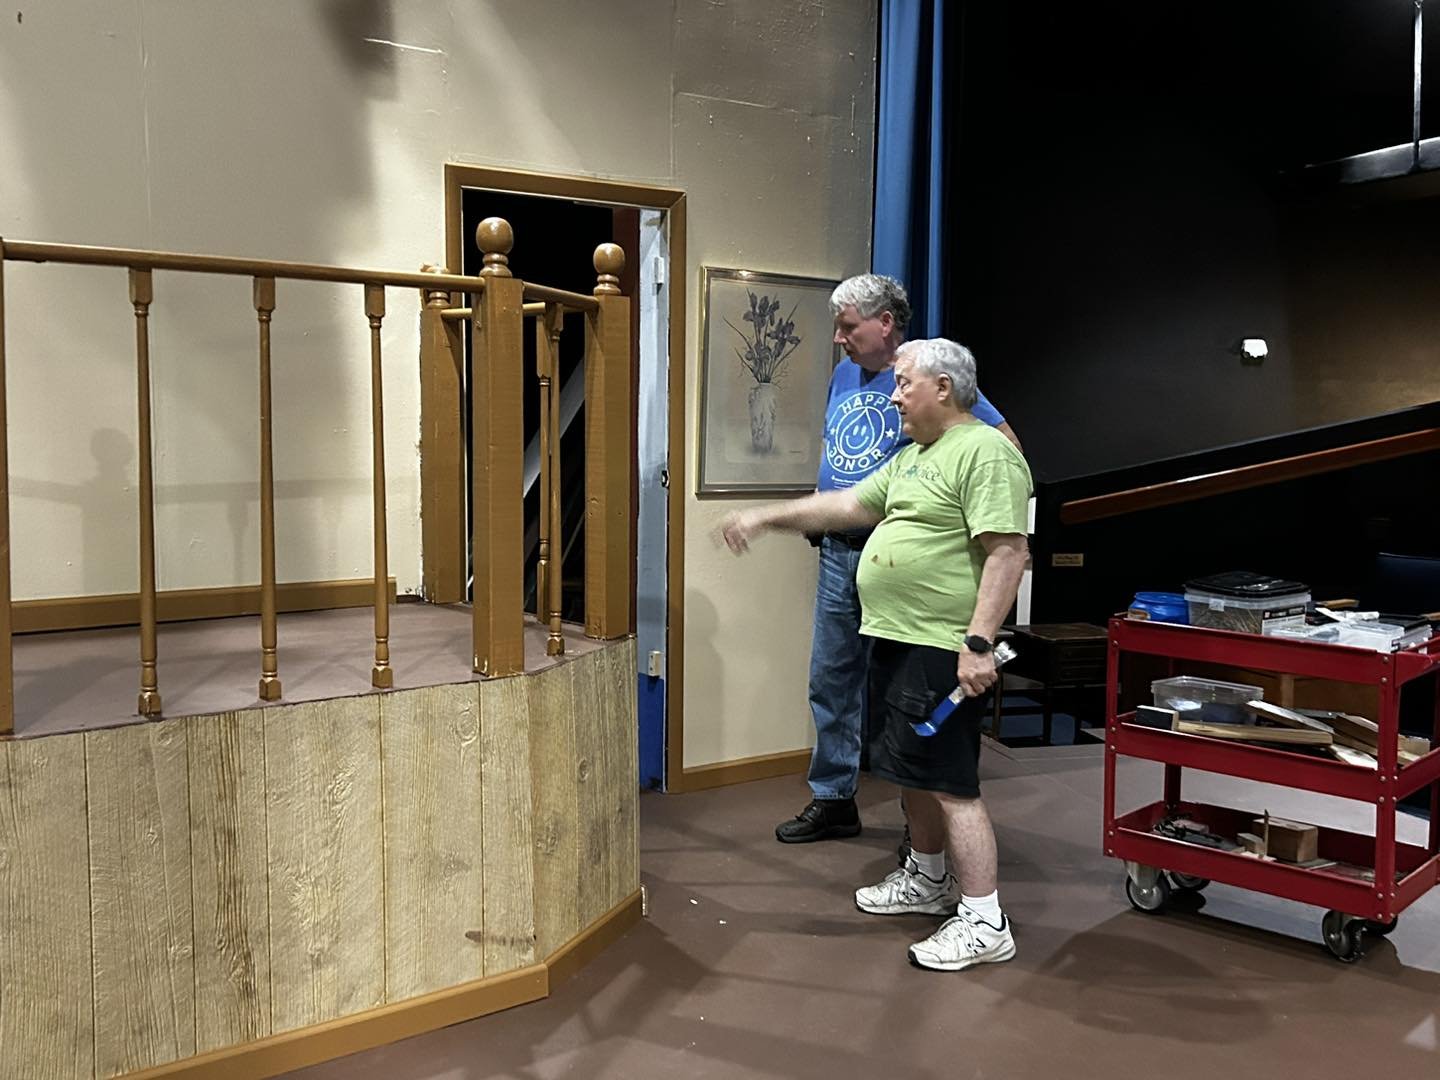 We&rsquo;re here until 12 pm to tear down the set in preparation for our Summer Teen Play! 💪 Come join in!

Donuts 🍩 and coffee ☕️ provided 😌

🎟️ Volunteers earn a FREE ticket to the show they assist on! 

High School students can earn volunteer 